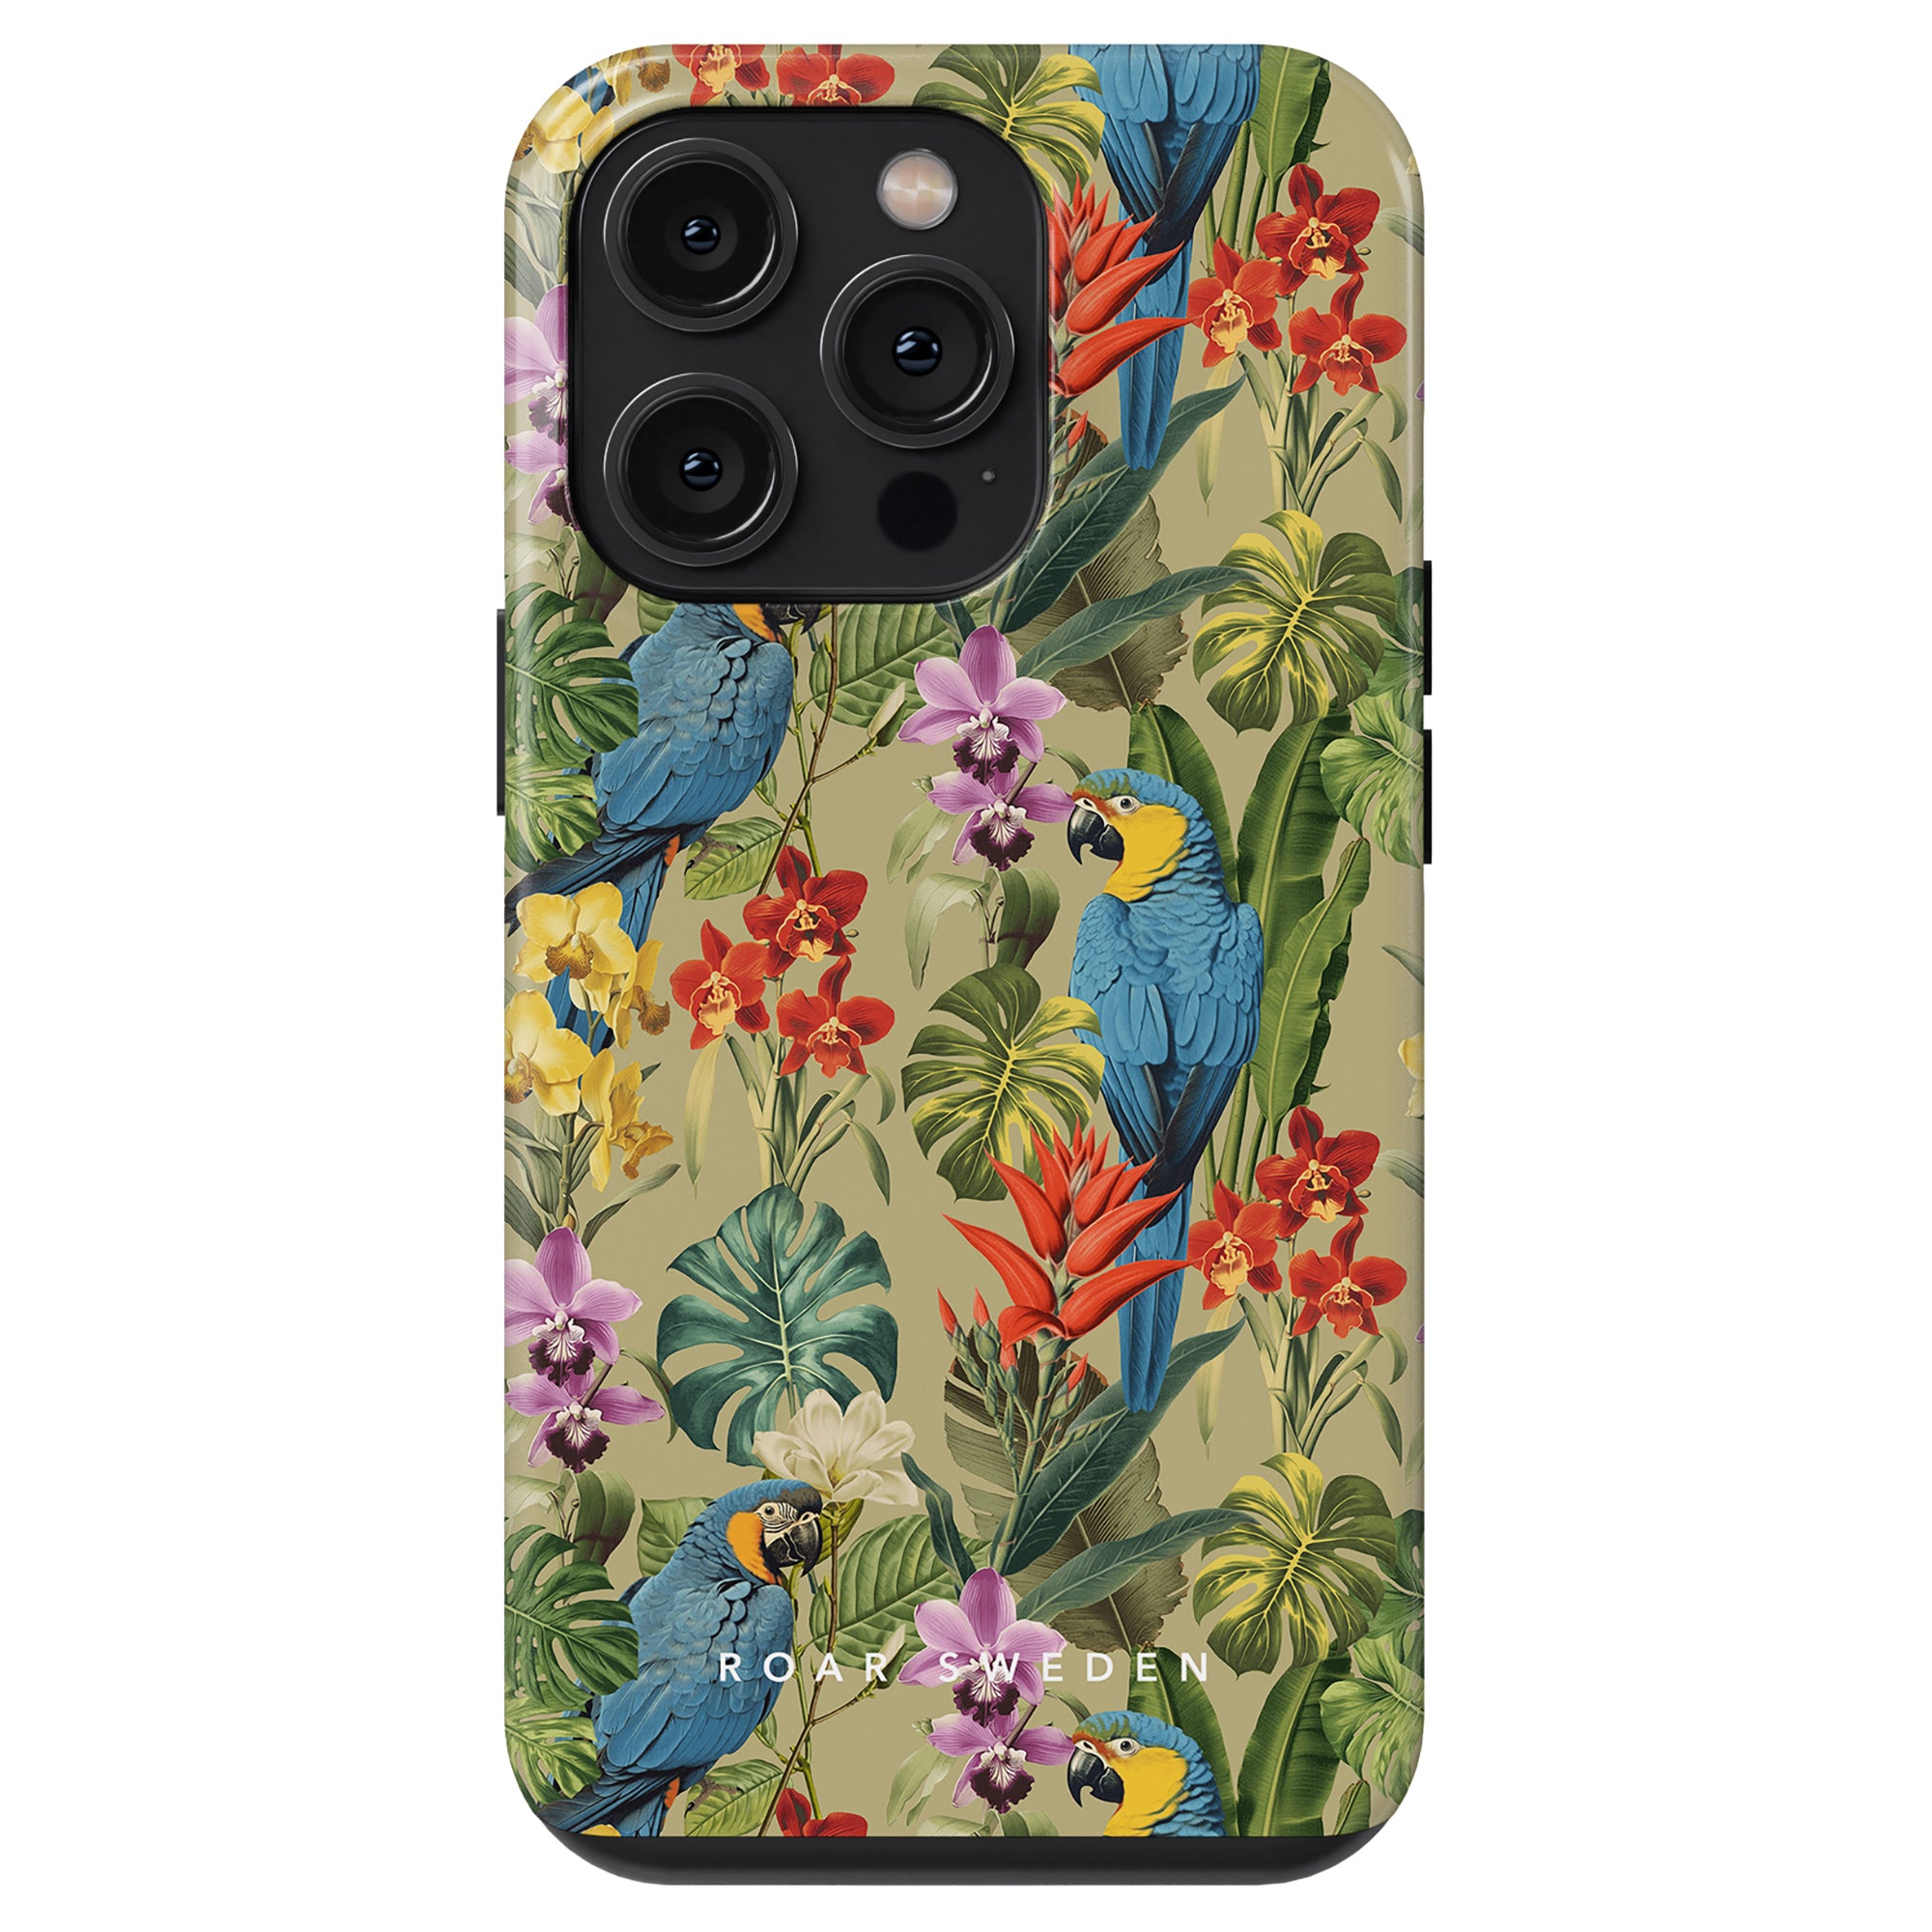 Smartphone with a Verdant Beauty - Tough Case featuring a vibrant tropical design that includes blue parrots, green leaves, and colorful flowers. The brand 'Roar Sweden' is printed at the bottom, making it a standout piece in the Birds Collection.